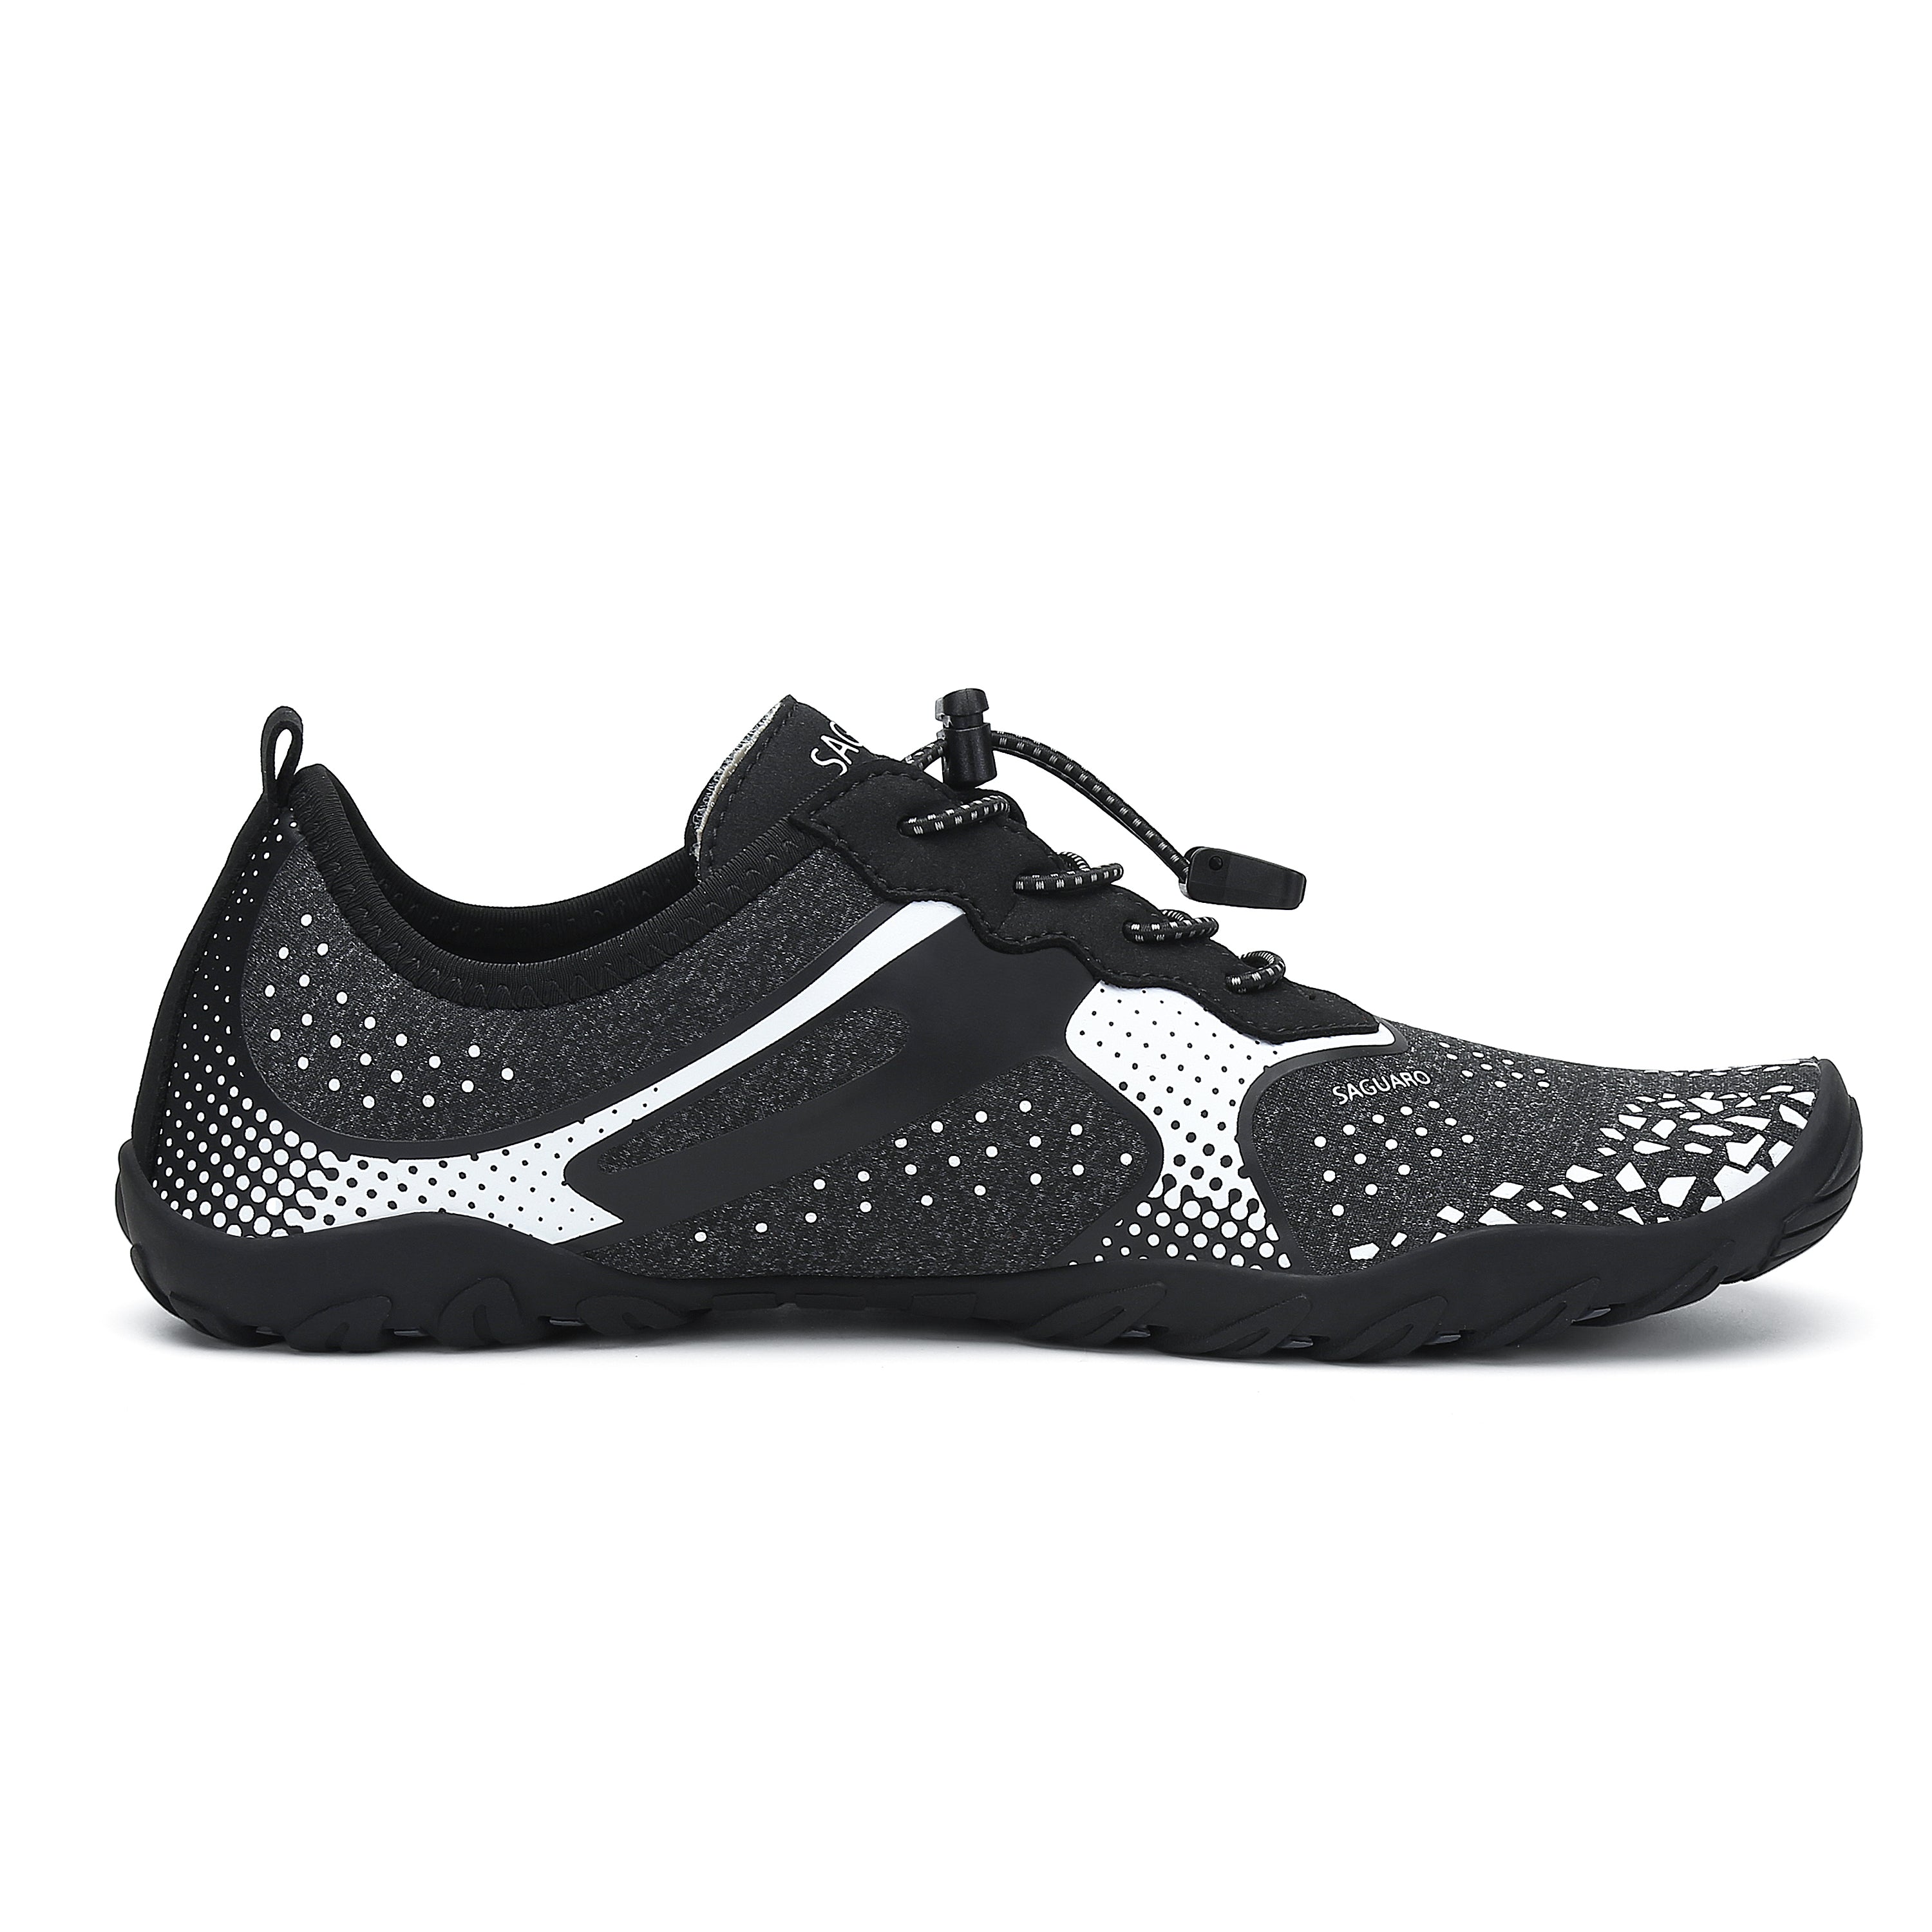 Womens Mens Water Shoes Barefoot Aqua Shoes Quick Dry Beach Swim Shoe for Diving Kayaking Surfing